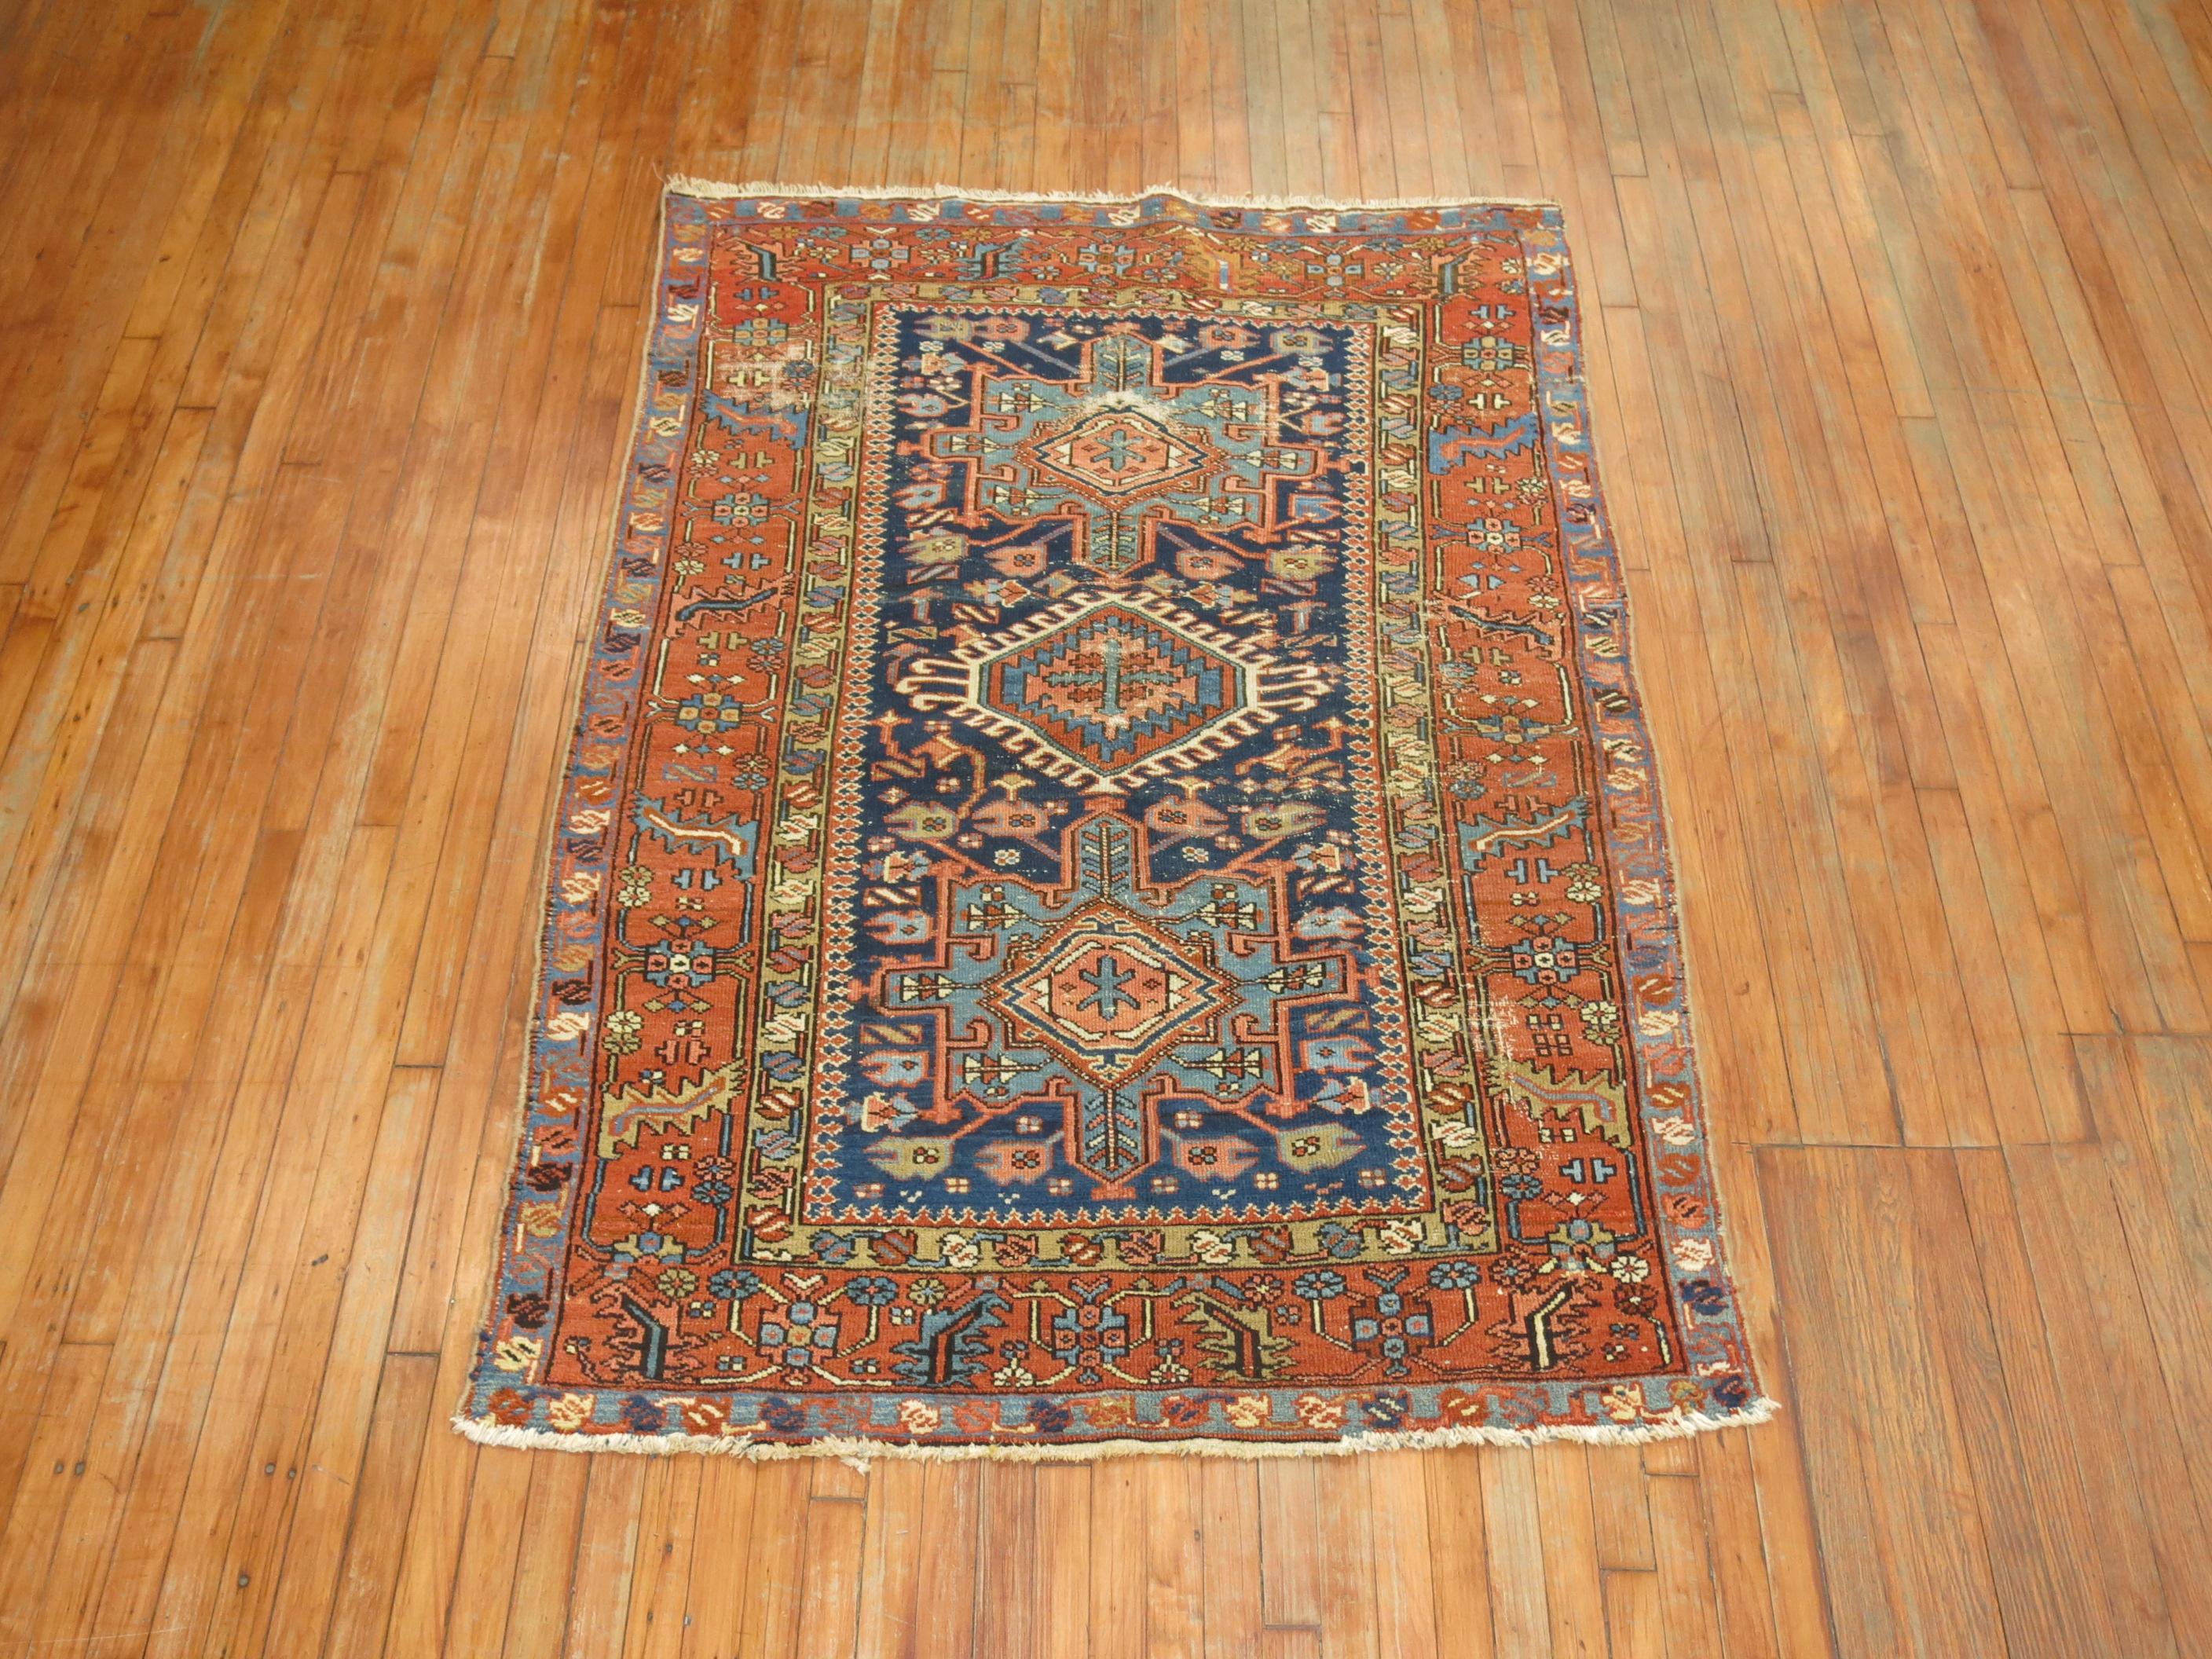 Antique Persian Heriz rug with an all-over geometric motif on a medium blue ground.